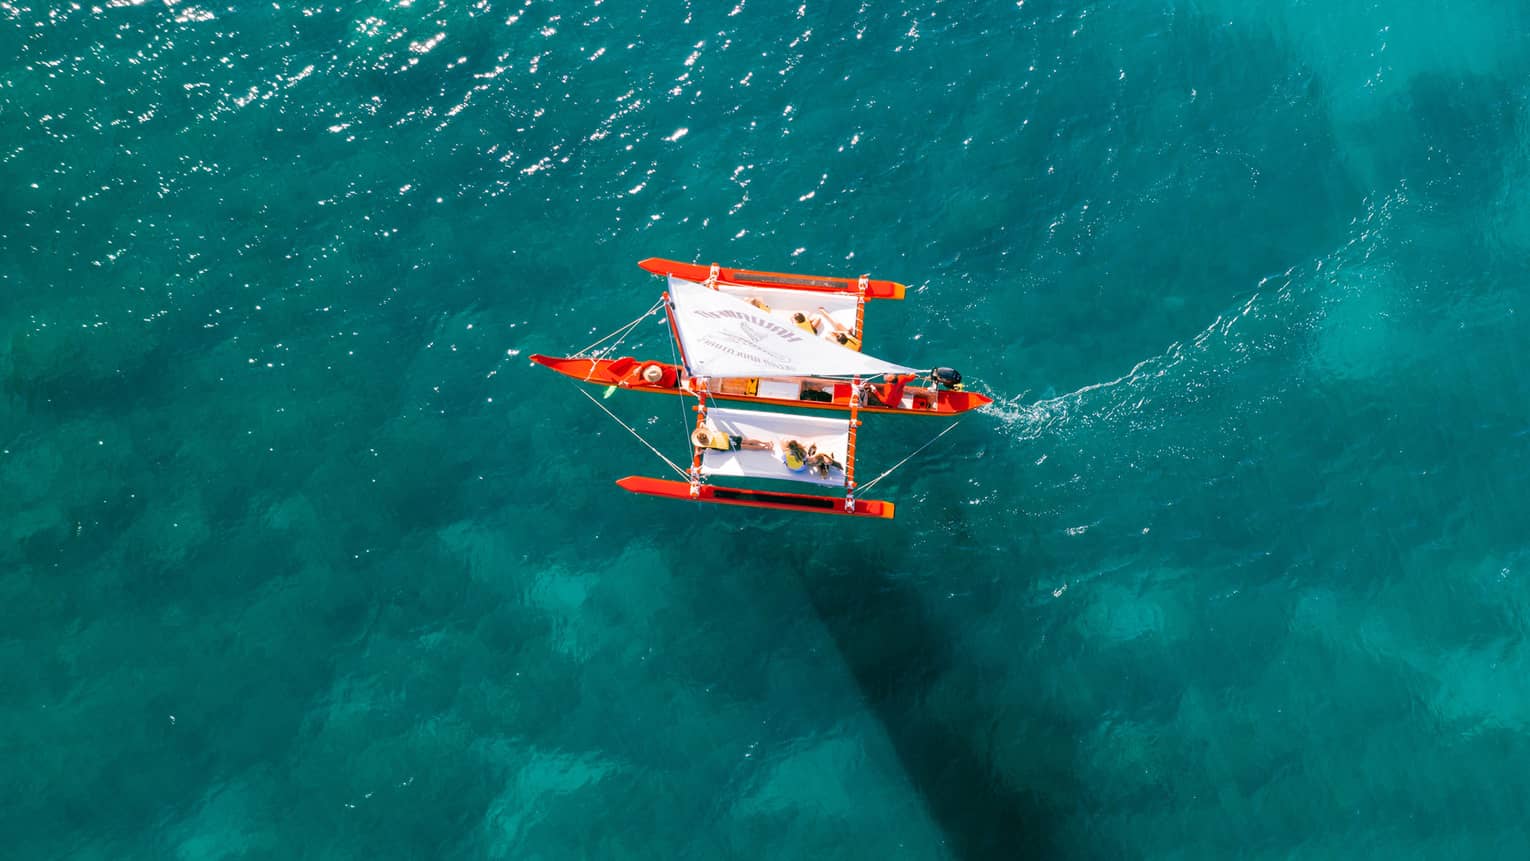 Aerial view of red and white boat surrounded by clear blue water